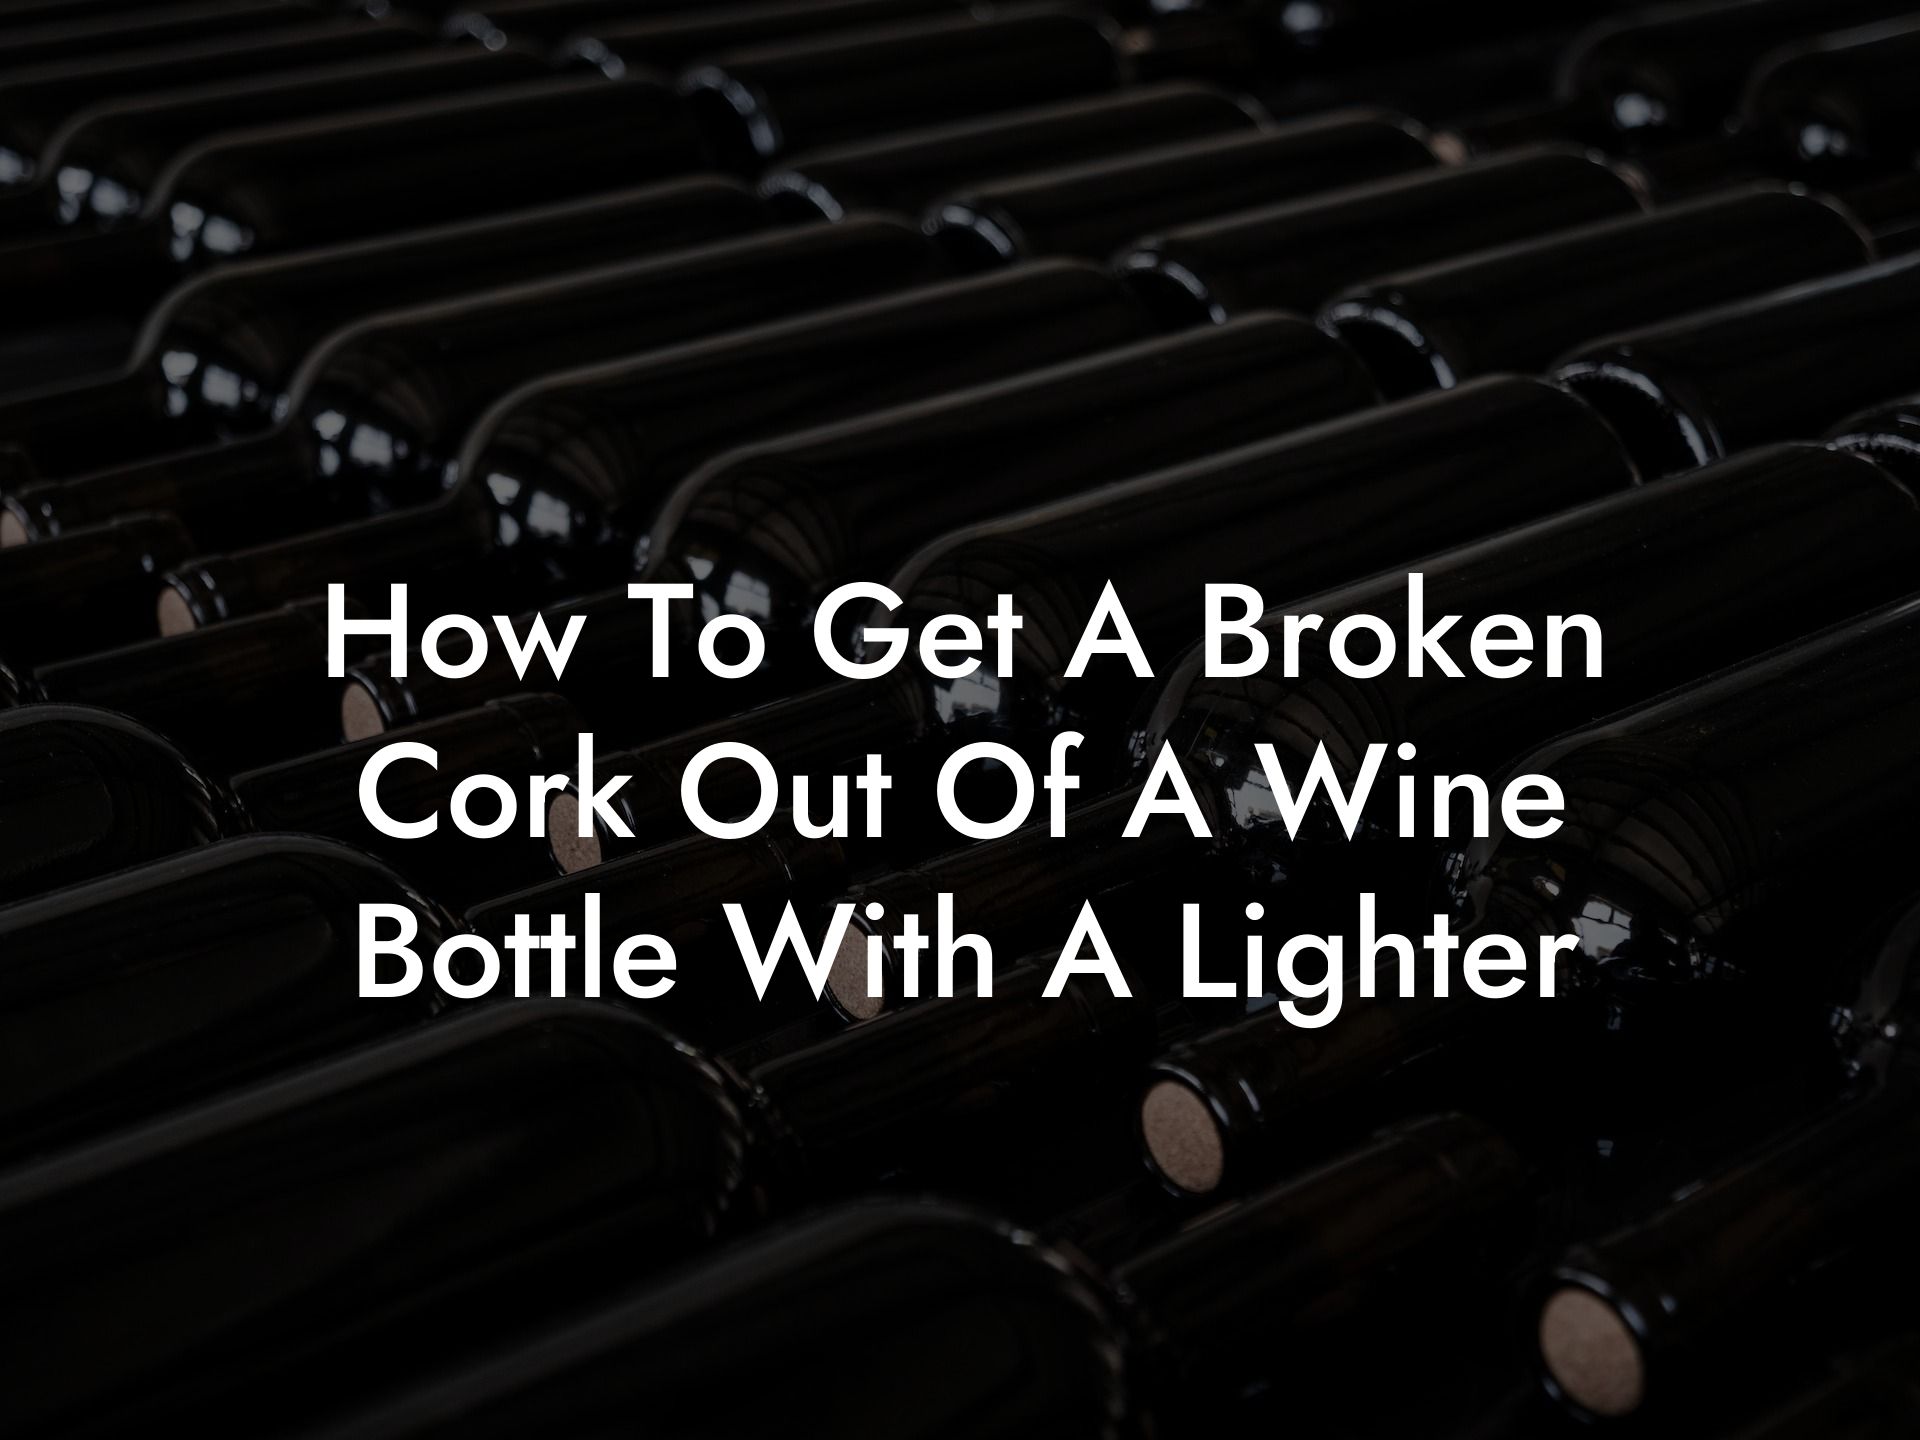 How To Get A Broken Cork Out Of A Wine Bottle With A Lighter